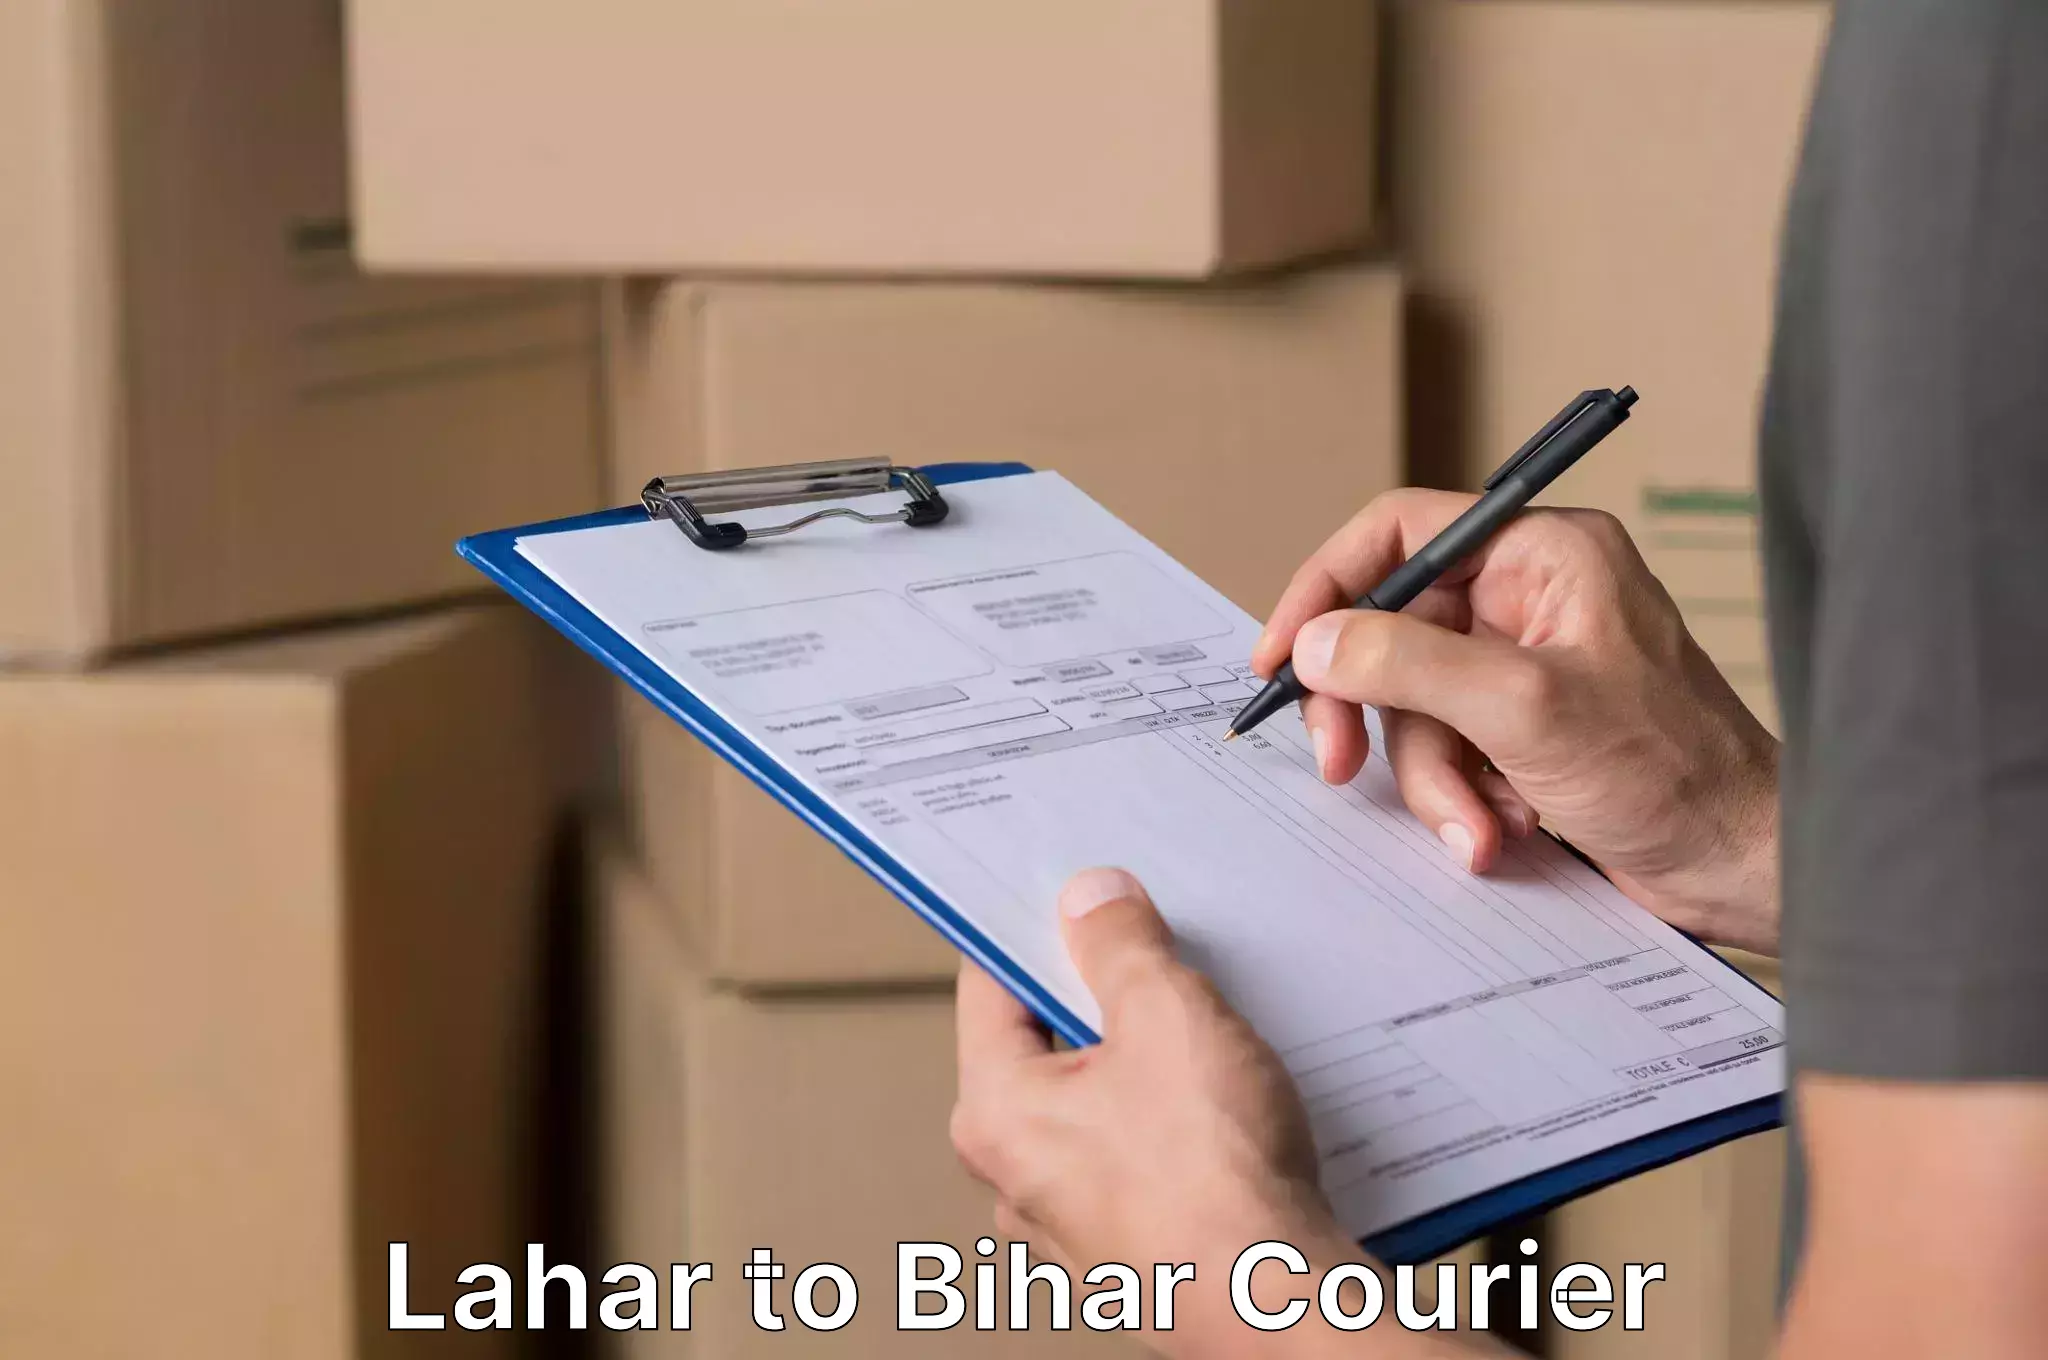 Specialized home movers Lahar to Bihar